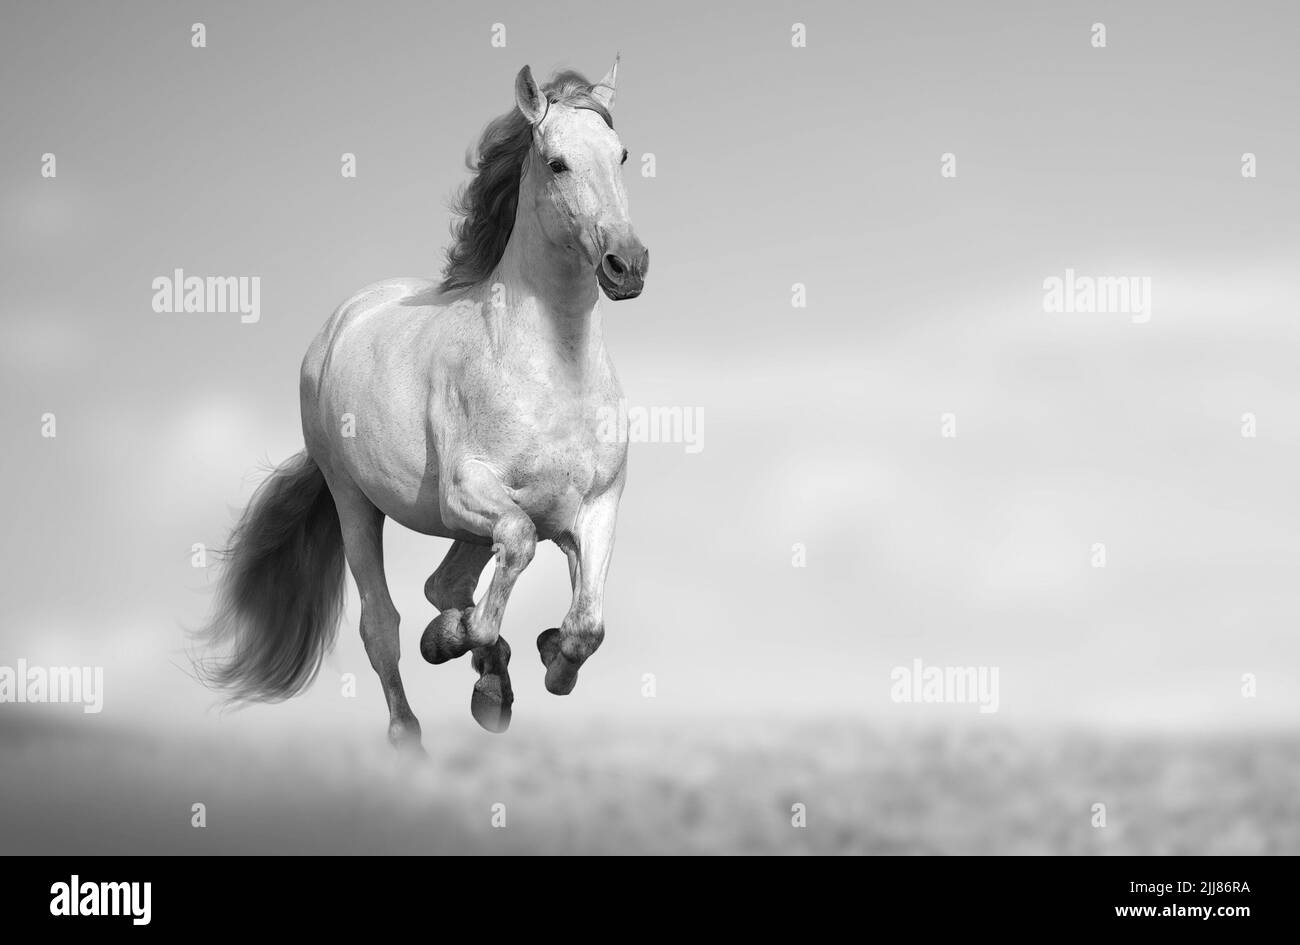 Beautiful andalusian horse running fast in the field. White long maned horse running in the field with grass and sky on the background. Galloping hors Stock Photo